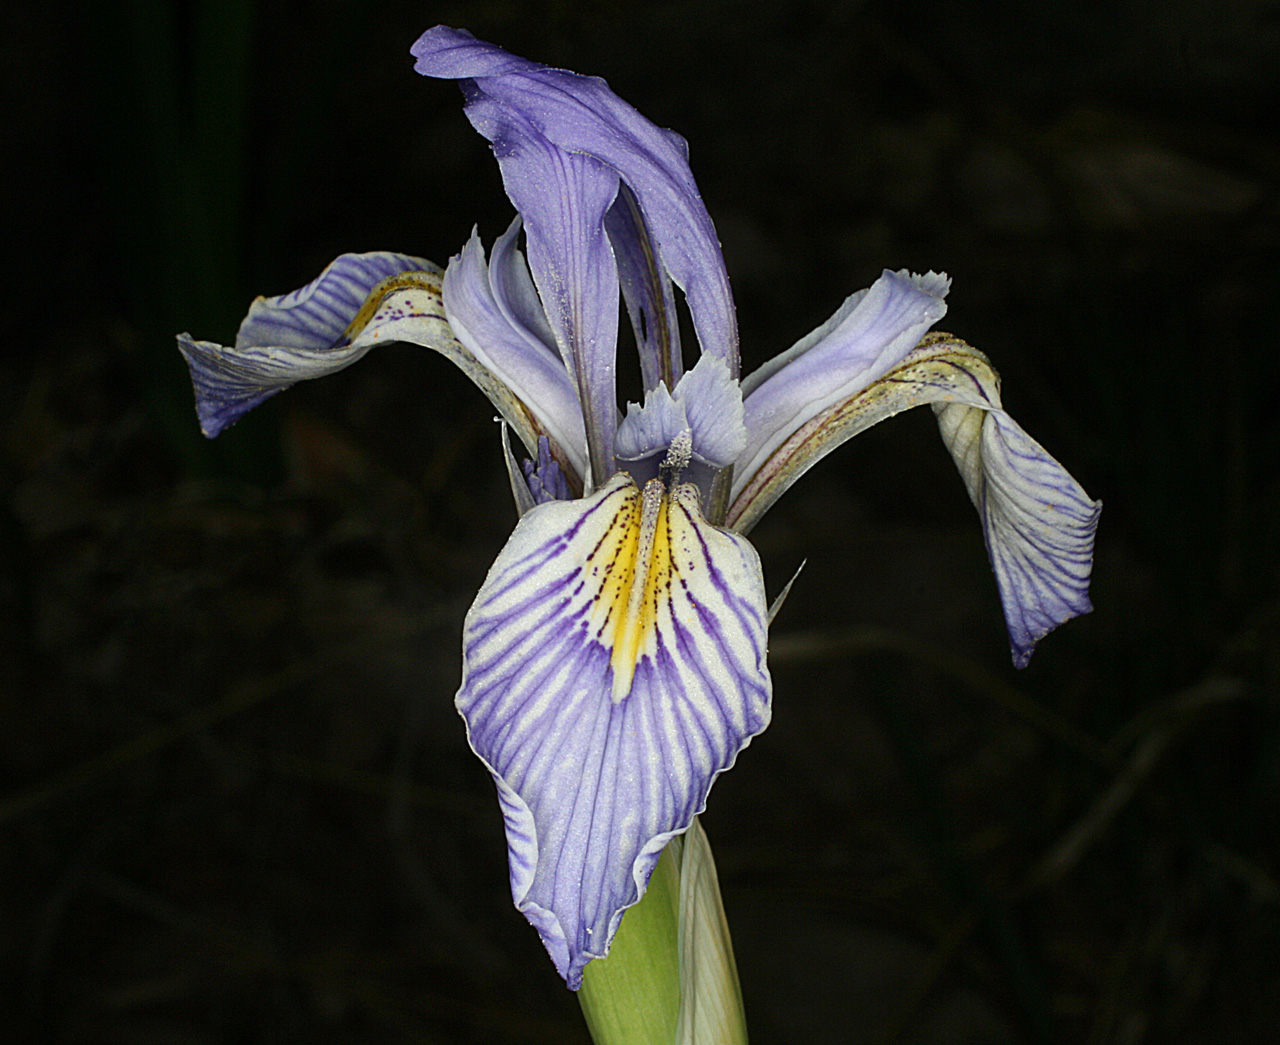 Close-up of flower, showing white and purple veined pattern with yellow toward the center